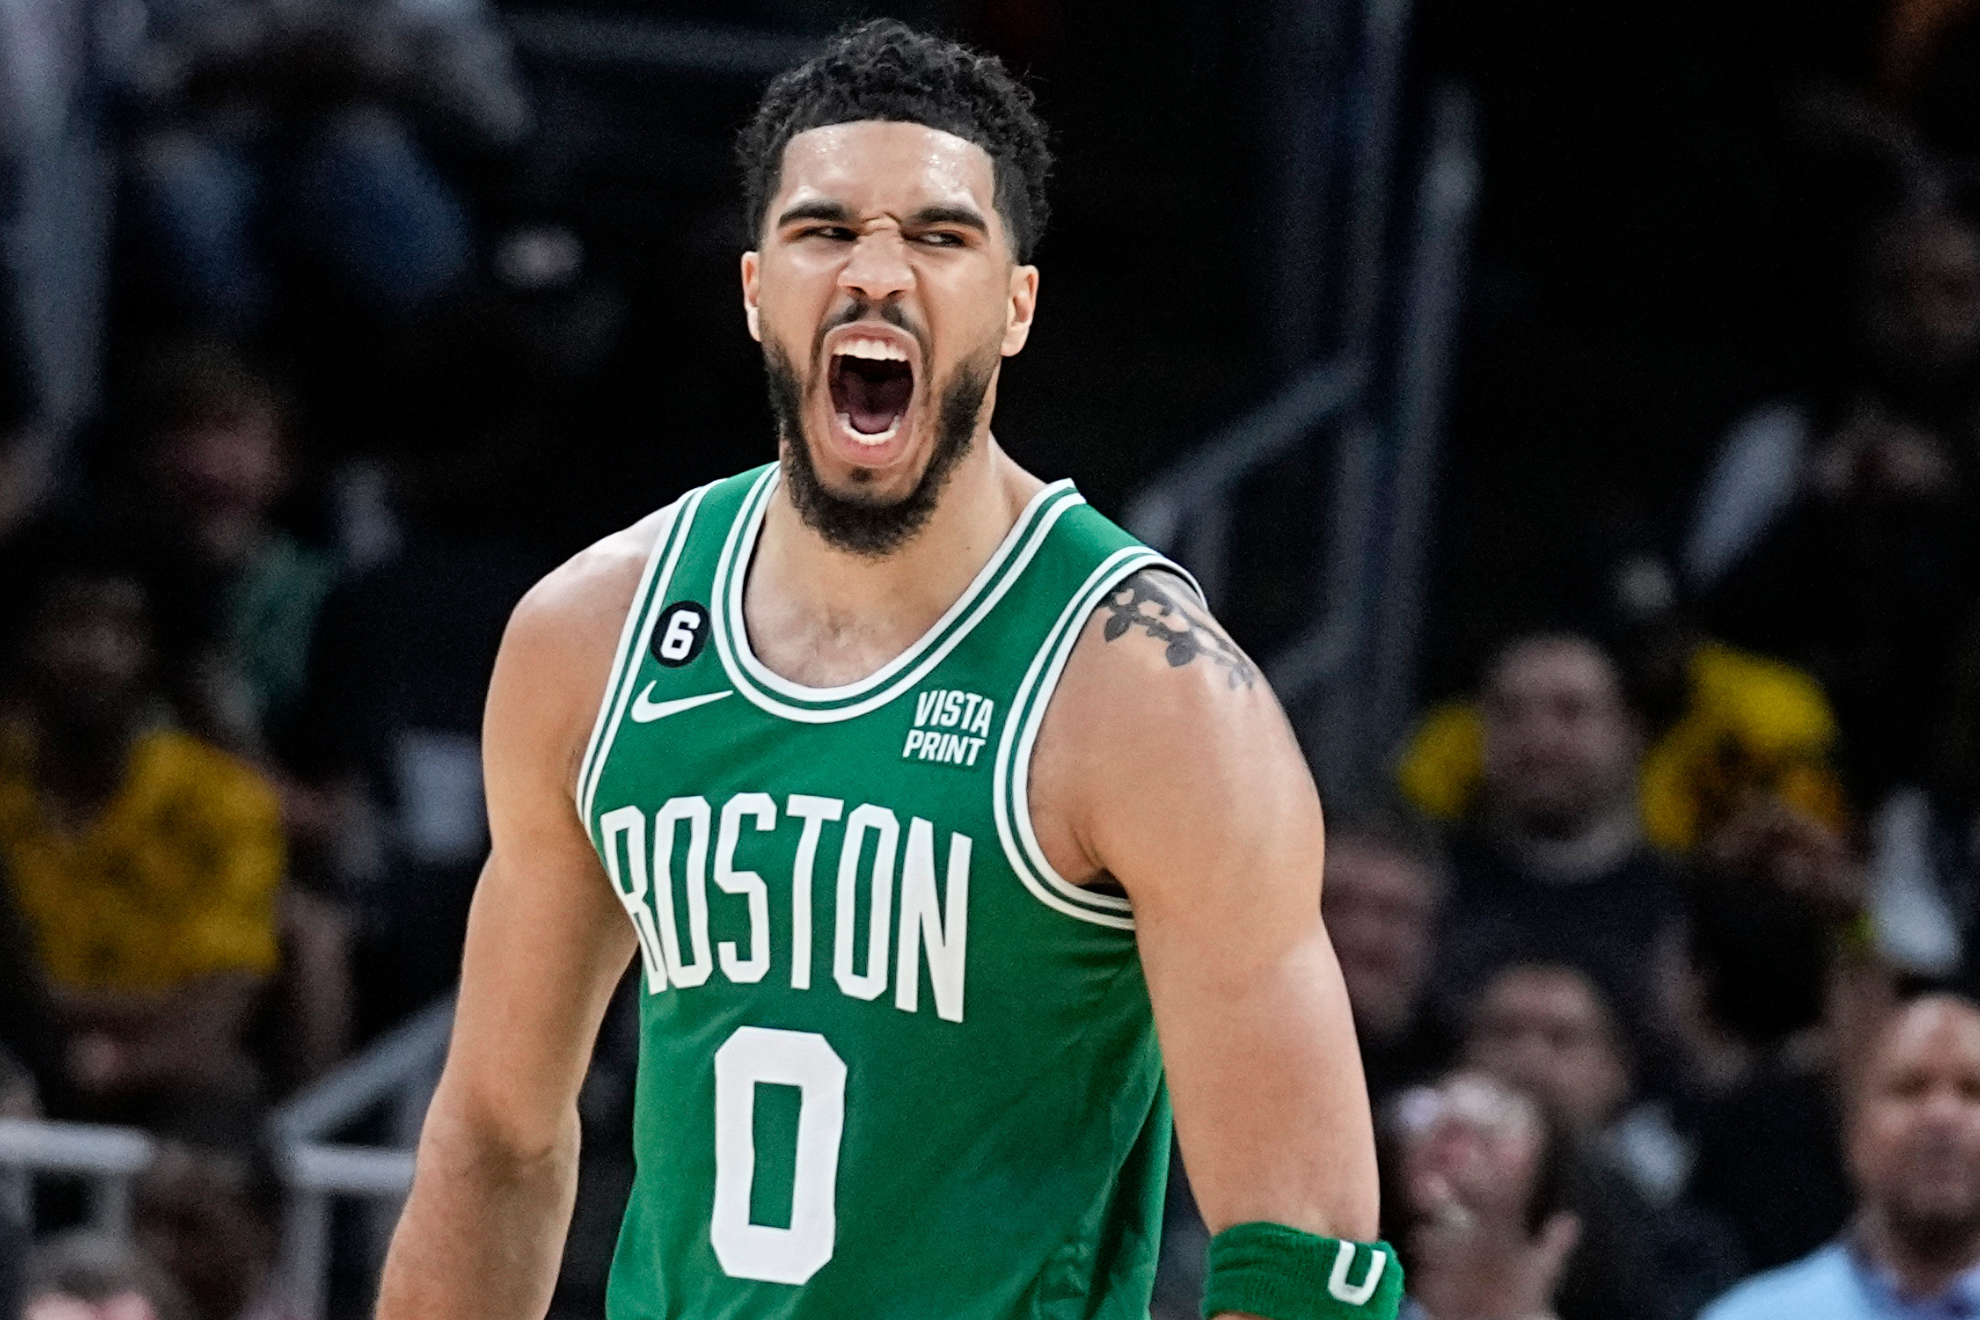 Jayson Tatum is averaging 28.5 points and 9.5 rebounds per game against the Hawks.